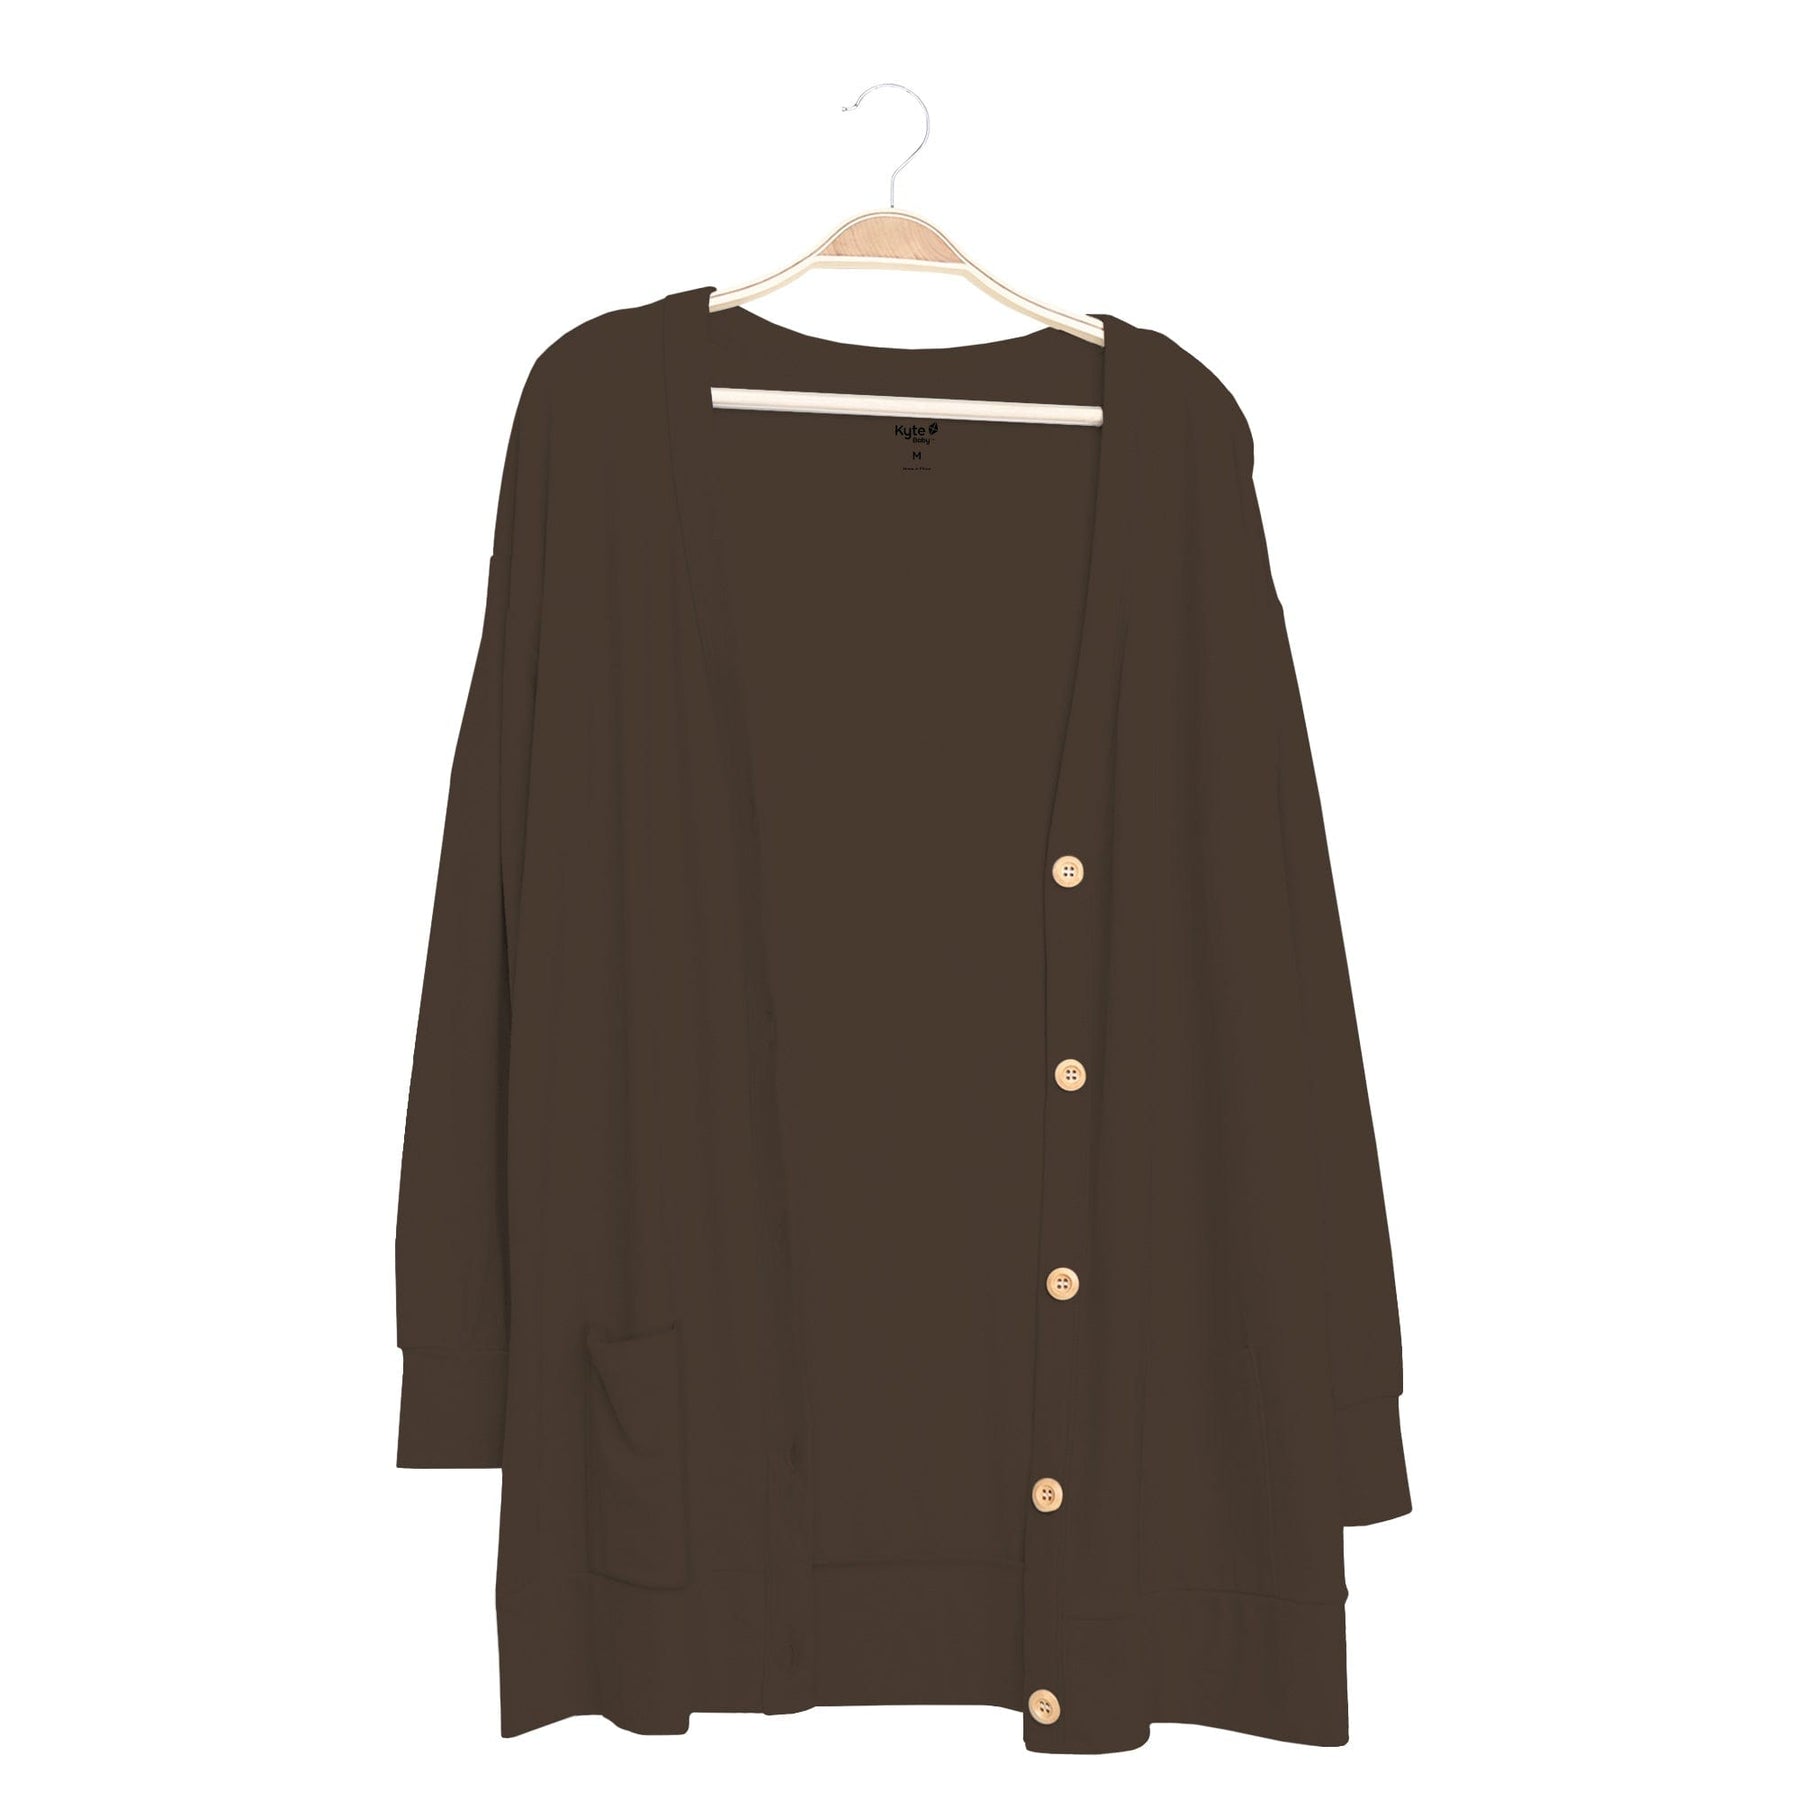 Kyte Baby Adult Bamboo Jersey Cardigan Bamboo Jersey Adult Cardigan in Espresso